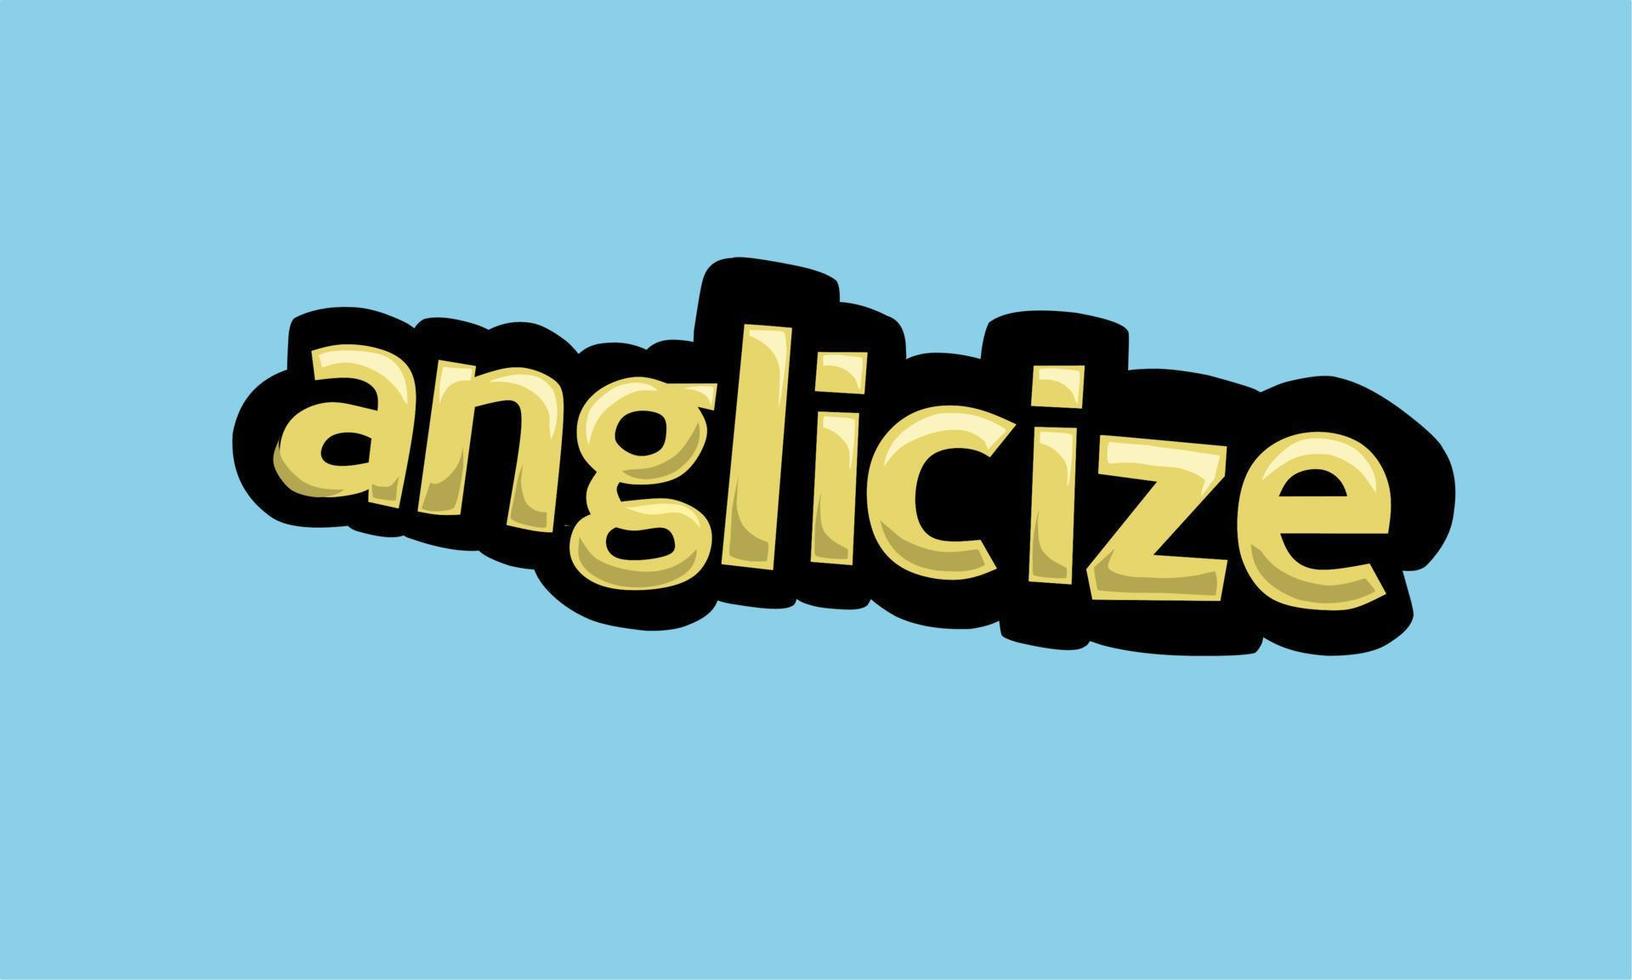 ANGLICIZE writing vector design on a blue background